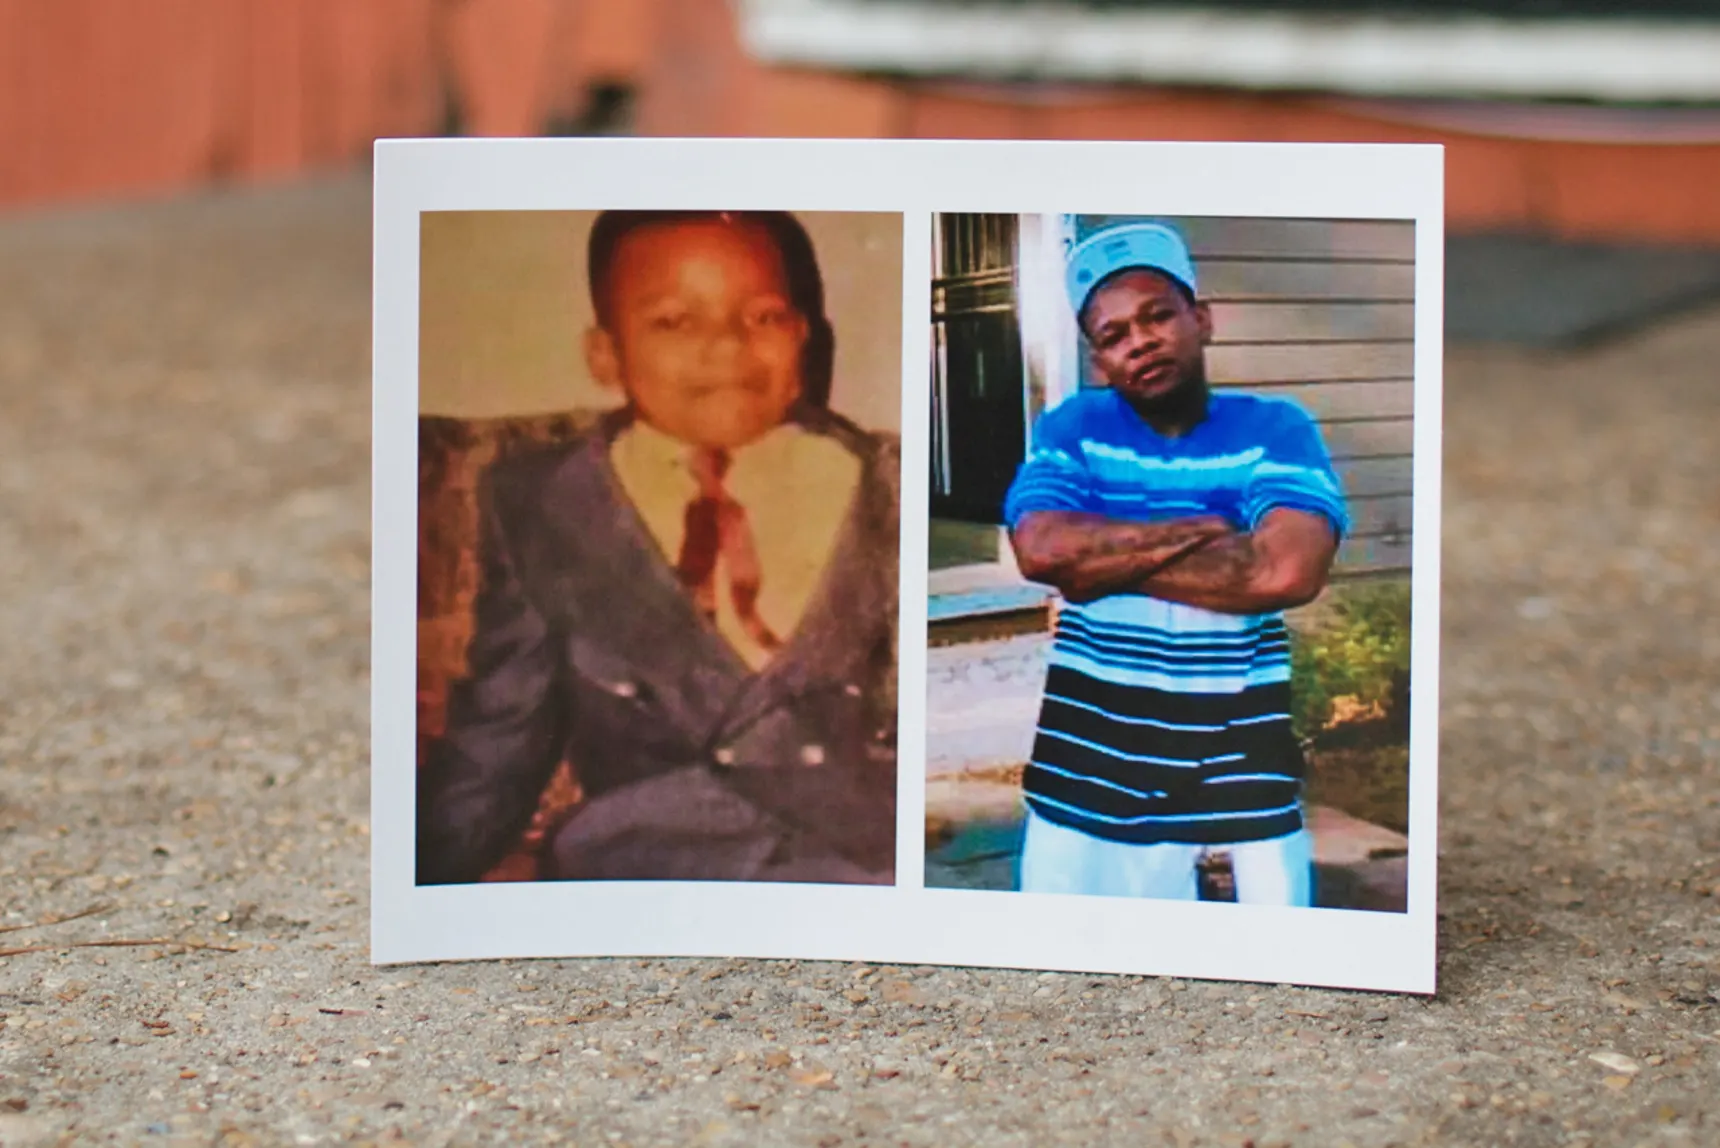 Dexter Wade was a dreamer when he was young, his mother said. Ashleigh Coleman for NBC News